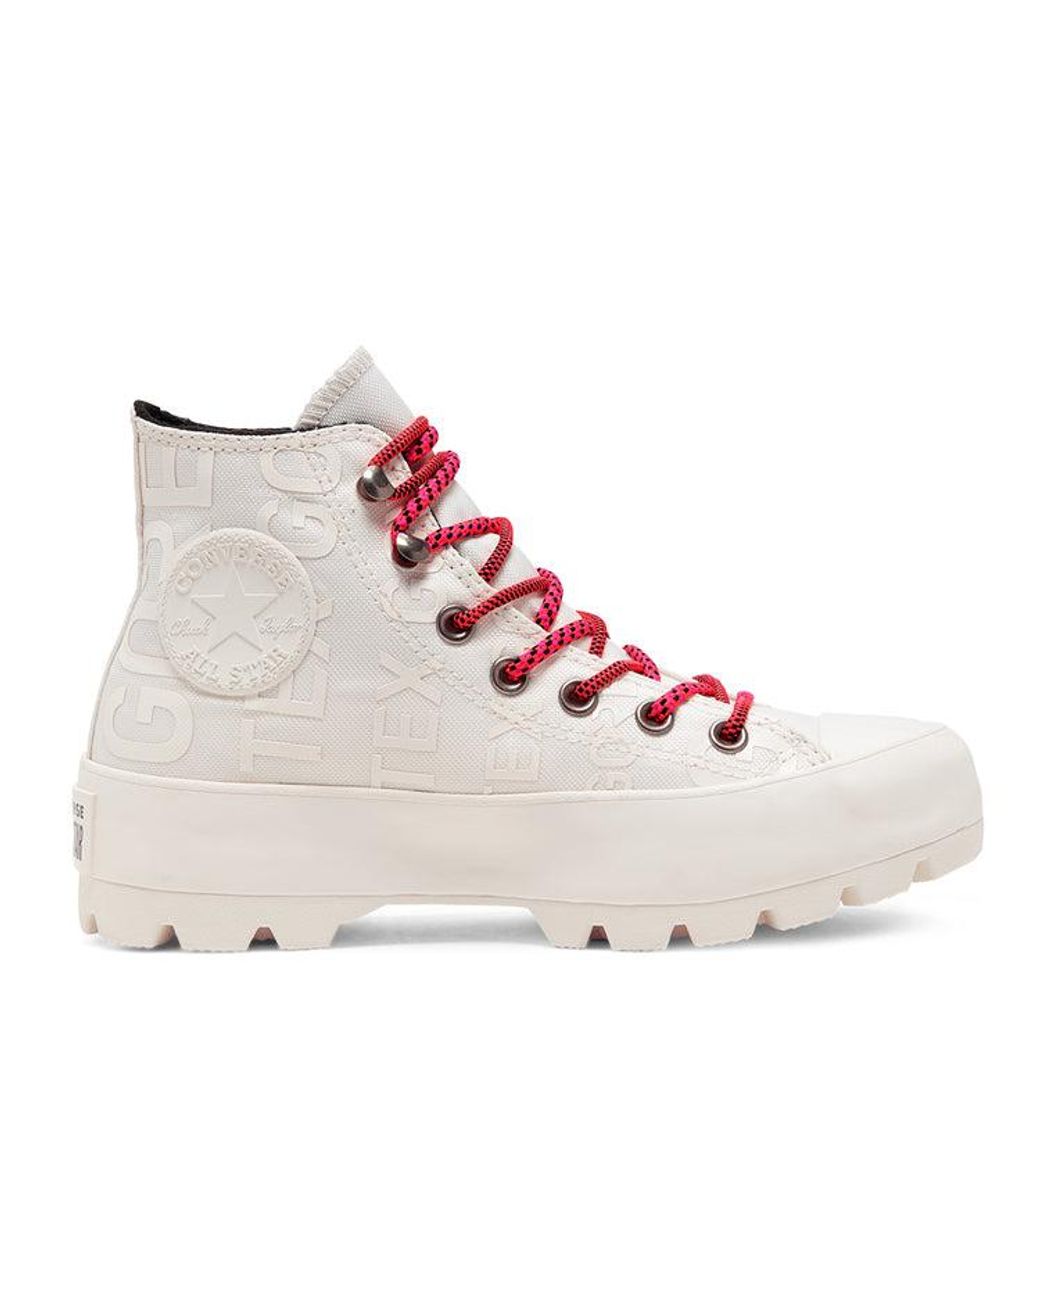 Converse Goretex lugged Winter Chuck Taylor All Star High Top in White |  Lyst